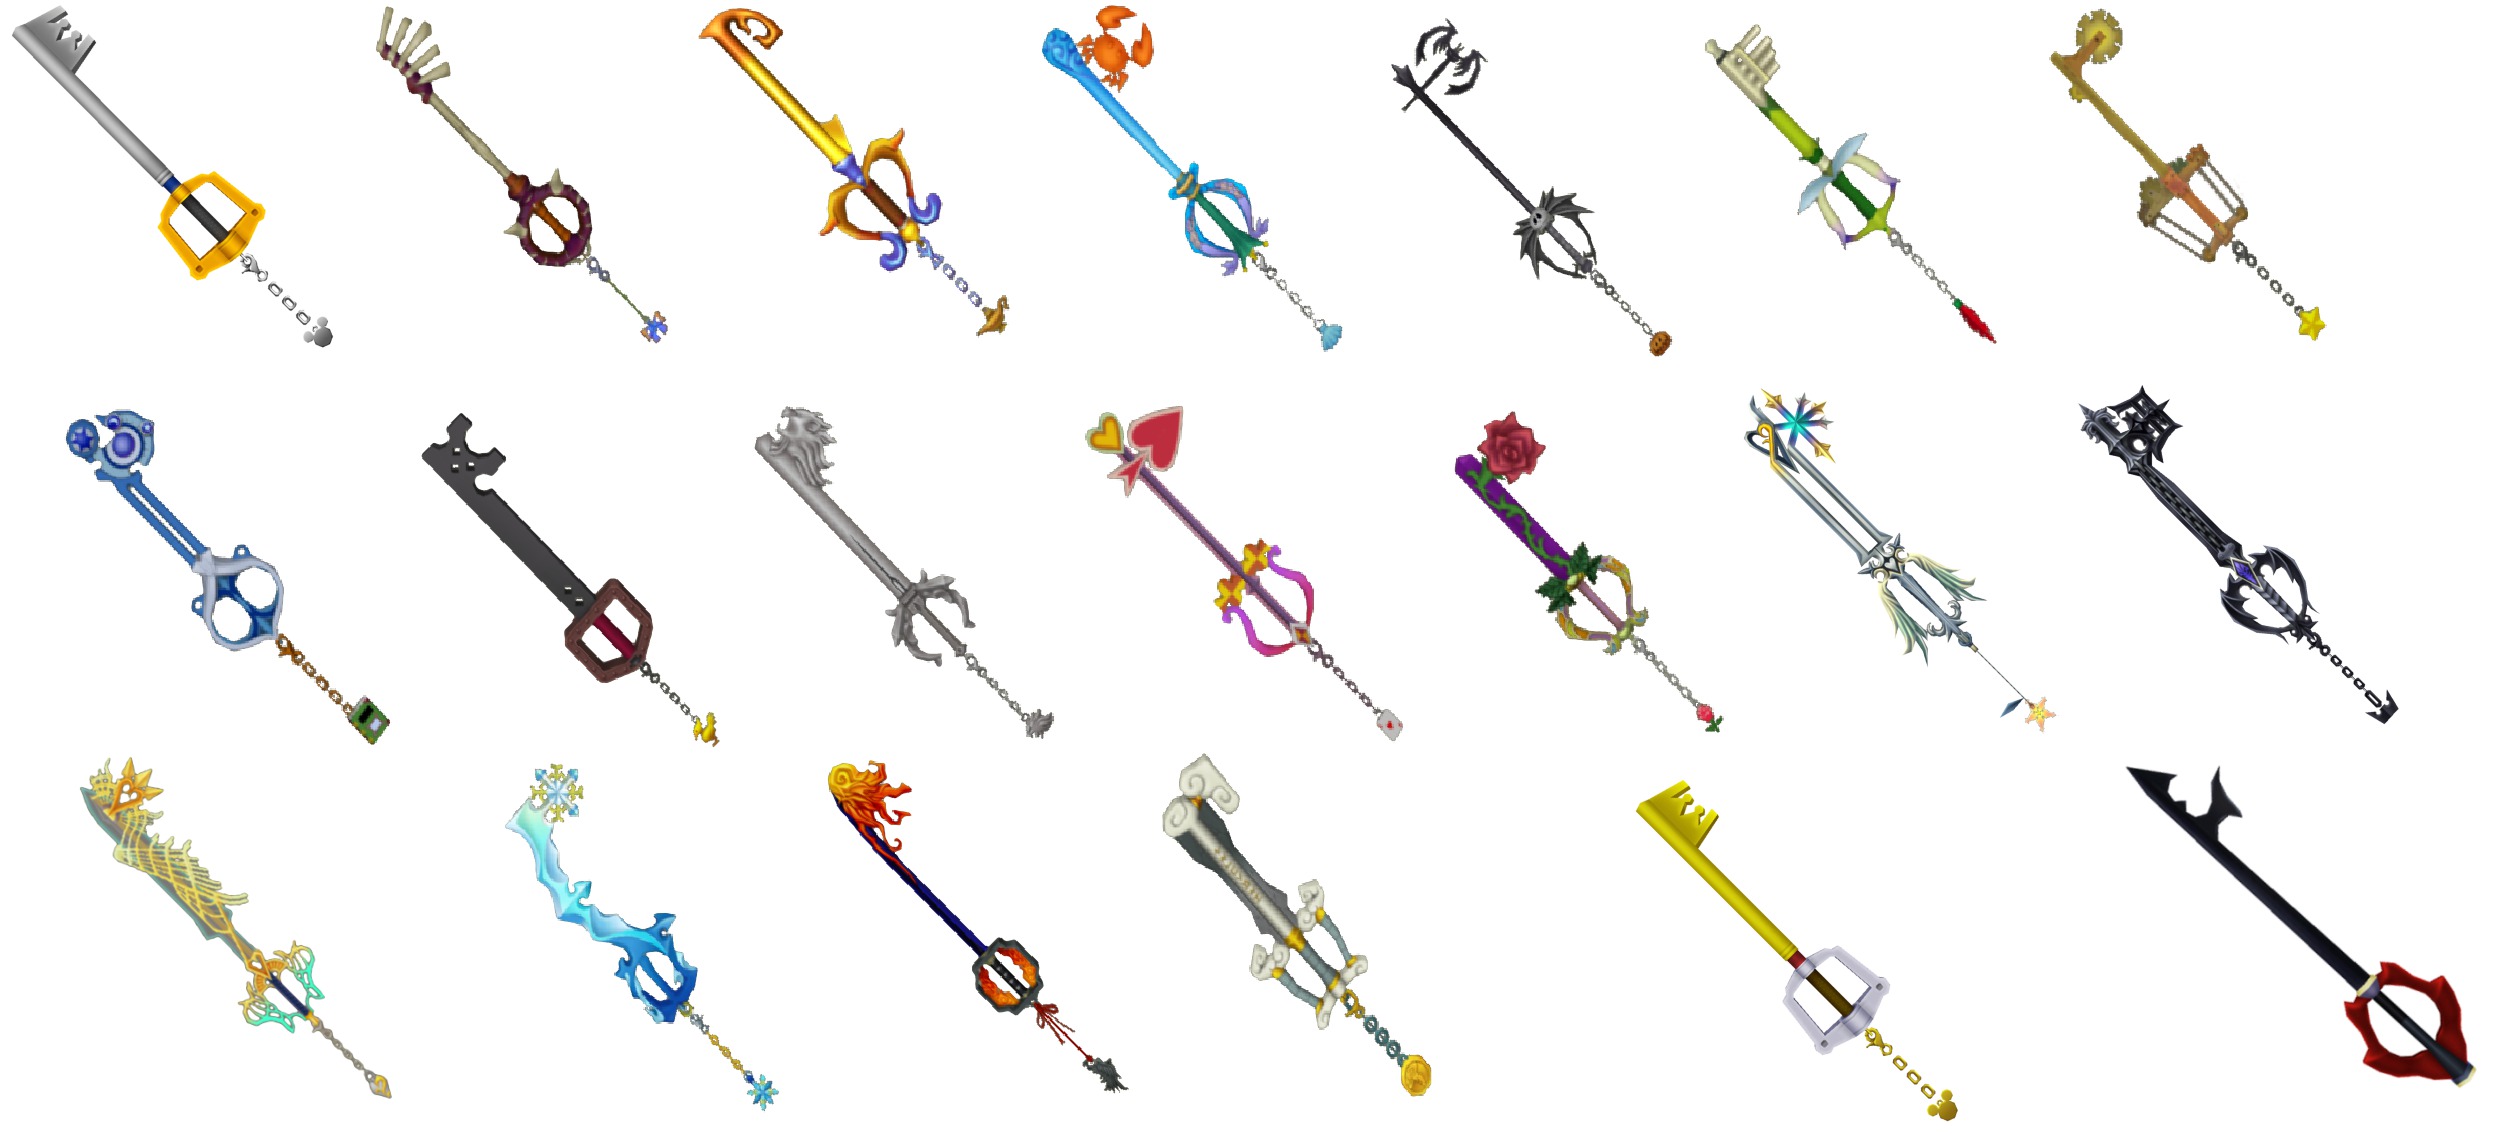 This Kingdom Hearts Keyblades Keyblade Many Keychains Image From Our